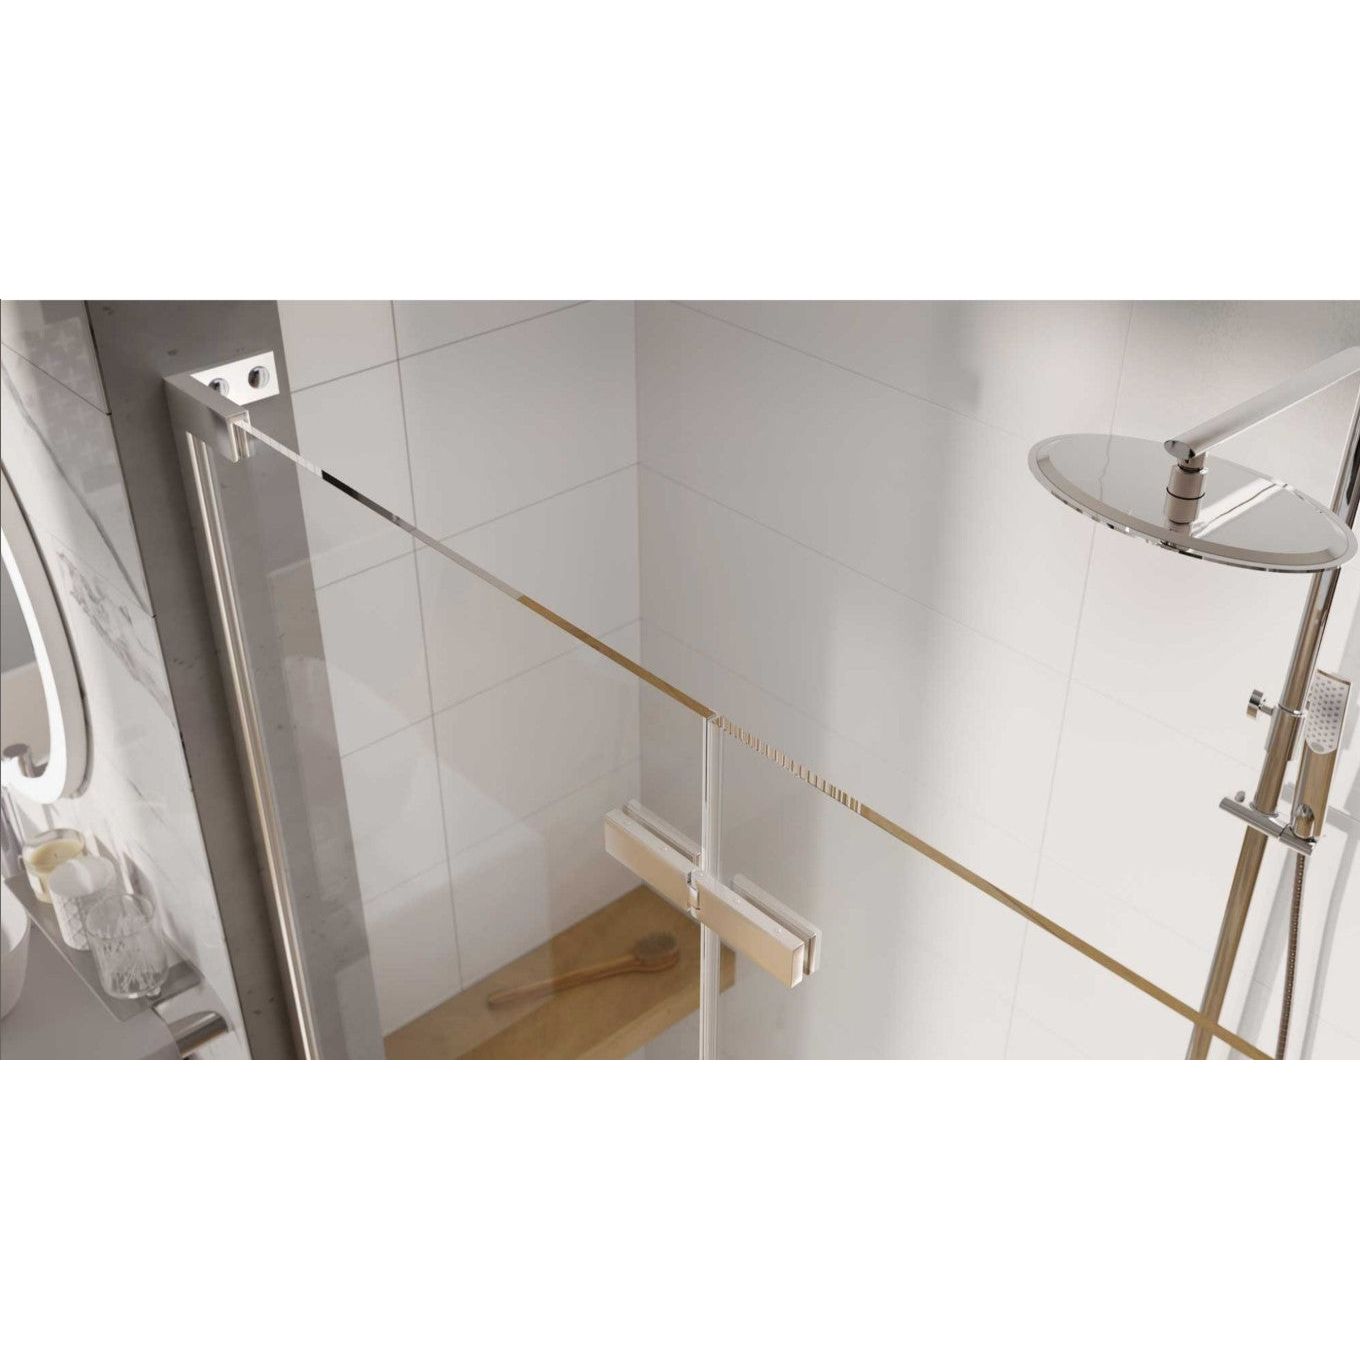 Evelyn 1000mm Hinged Shower Door with Fixed Panel